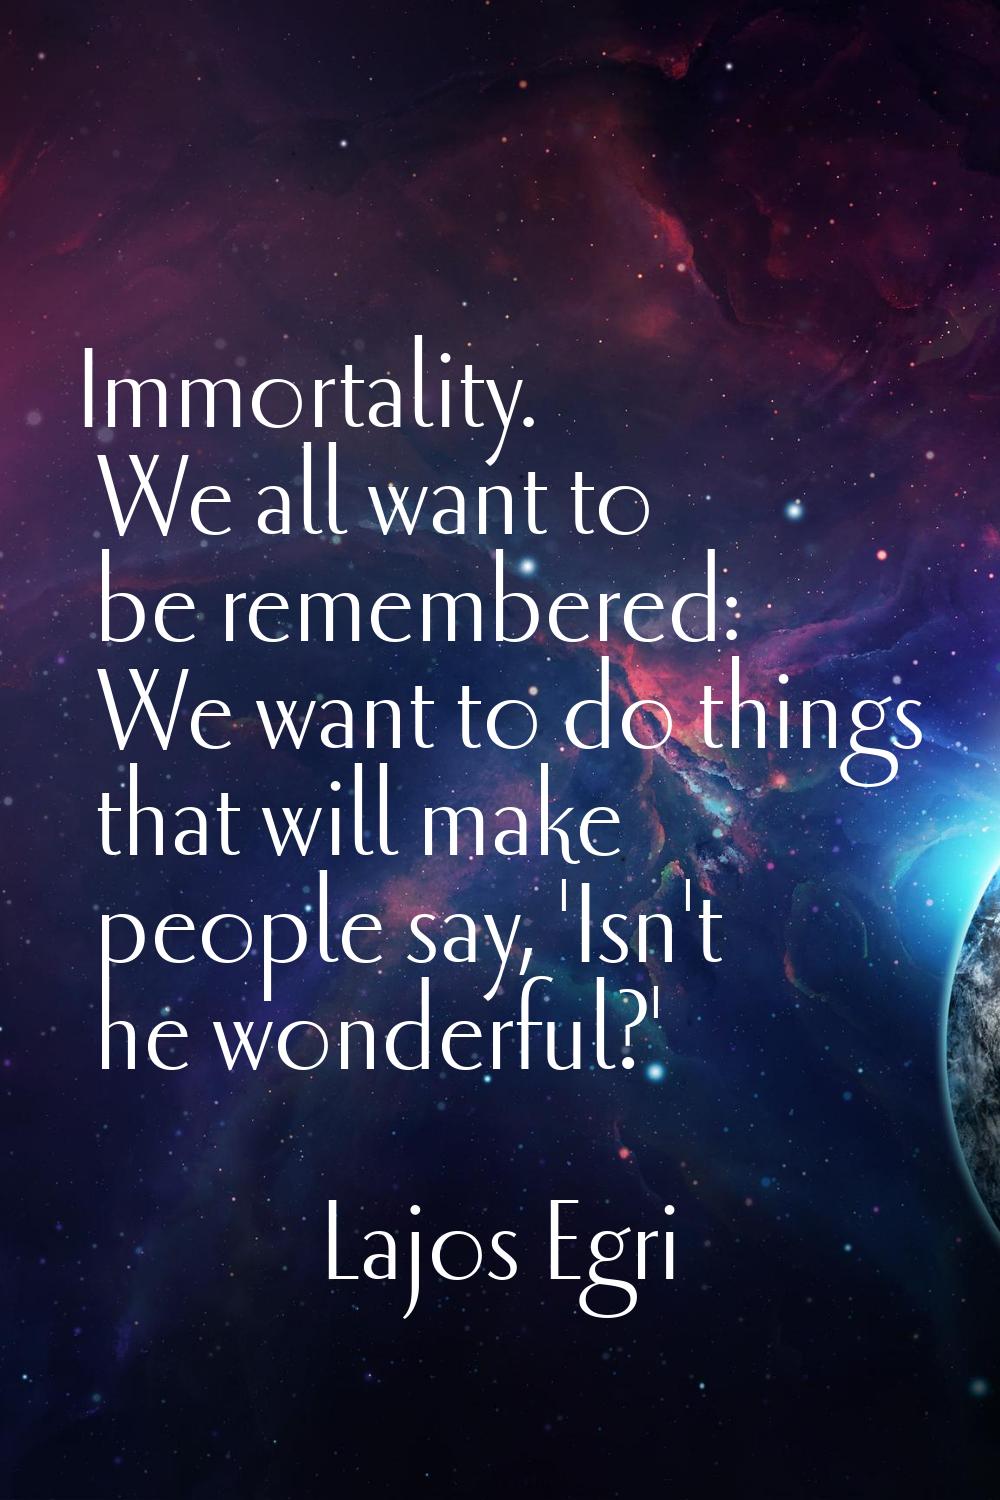 Immortality. We all want to be remembered: We want to do things that will make people say, 'Isn't h